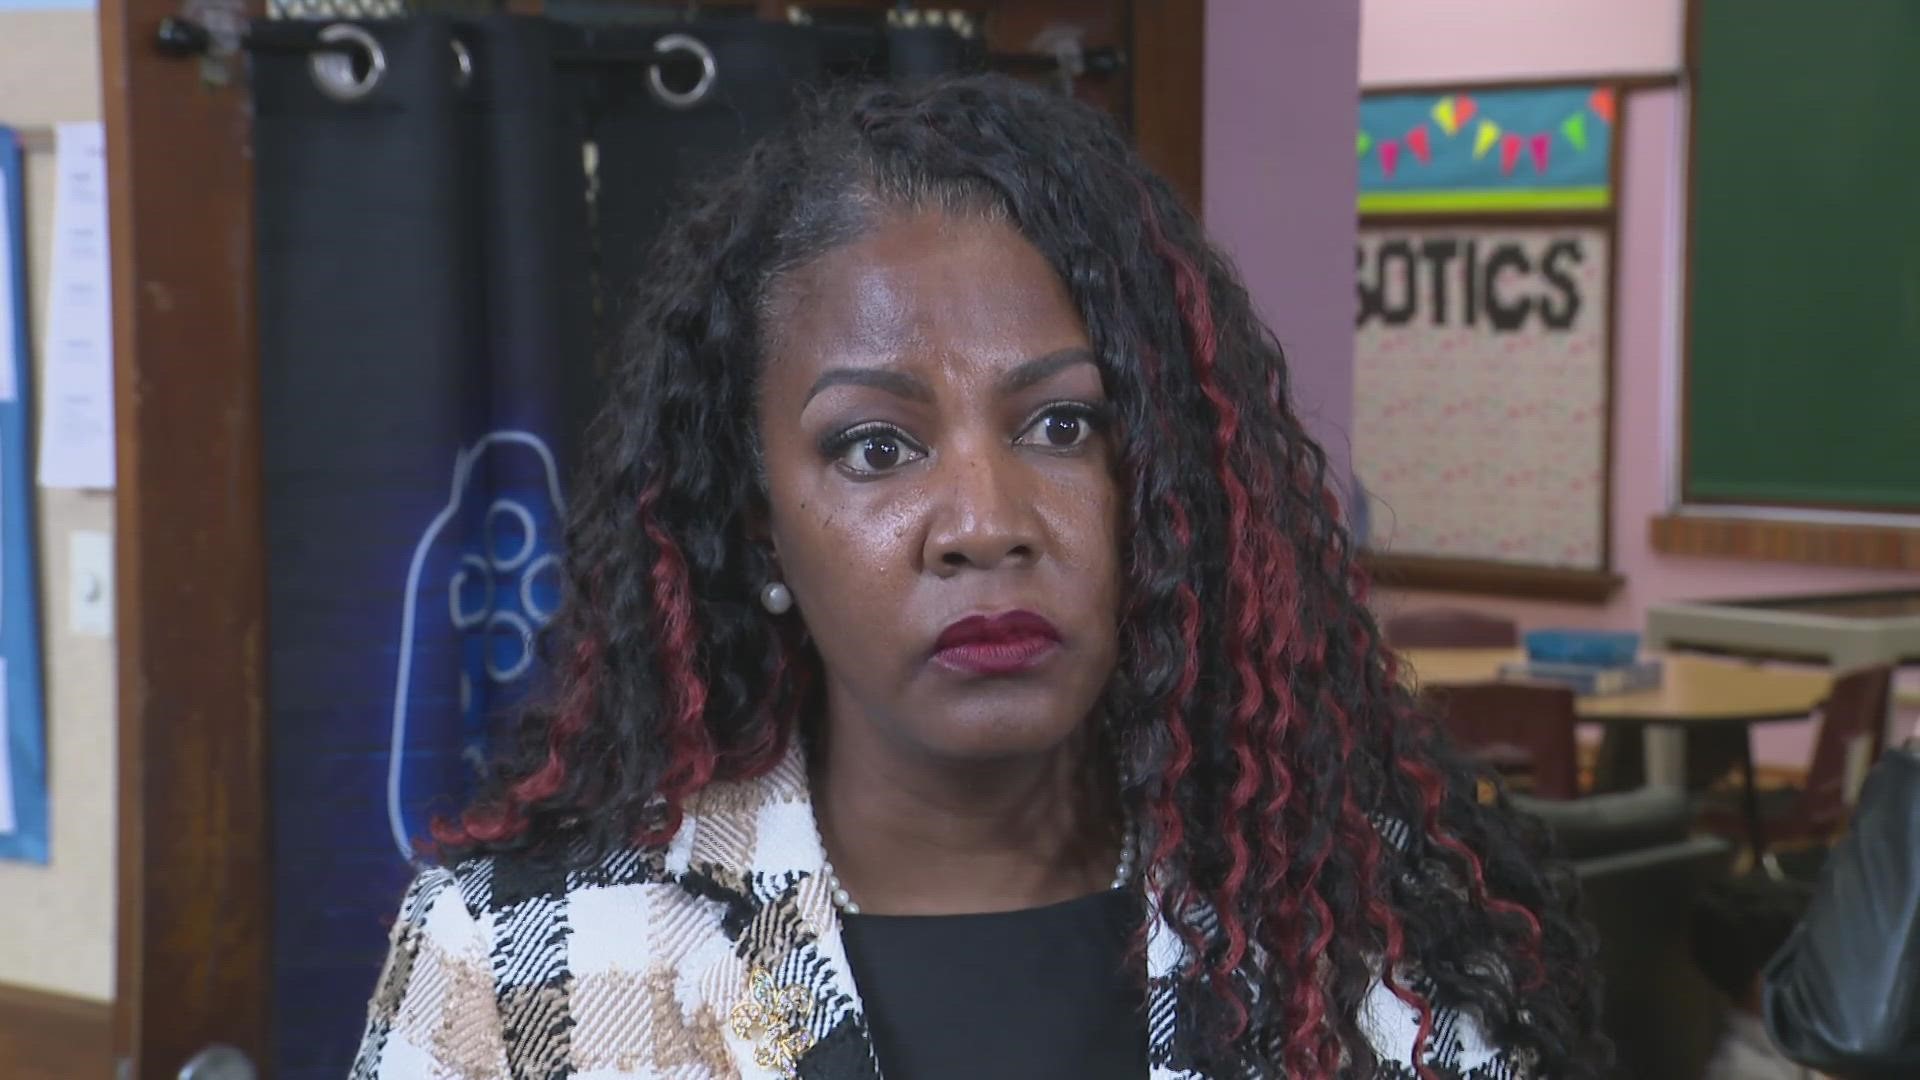 St. Louis Circuit Attorney Kim Gardner is coming under increasing pressure to resign. St. Louis Mayor Tishaura Jones spoke about the situation.